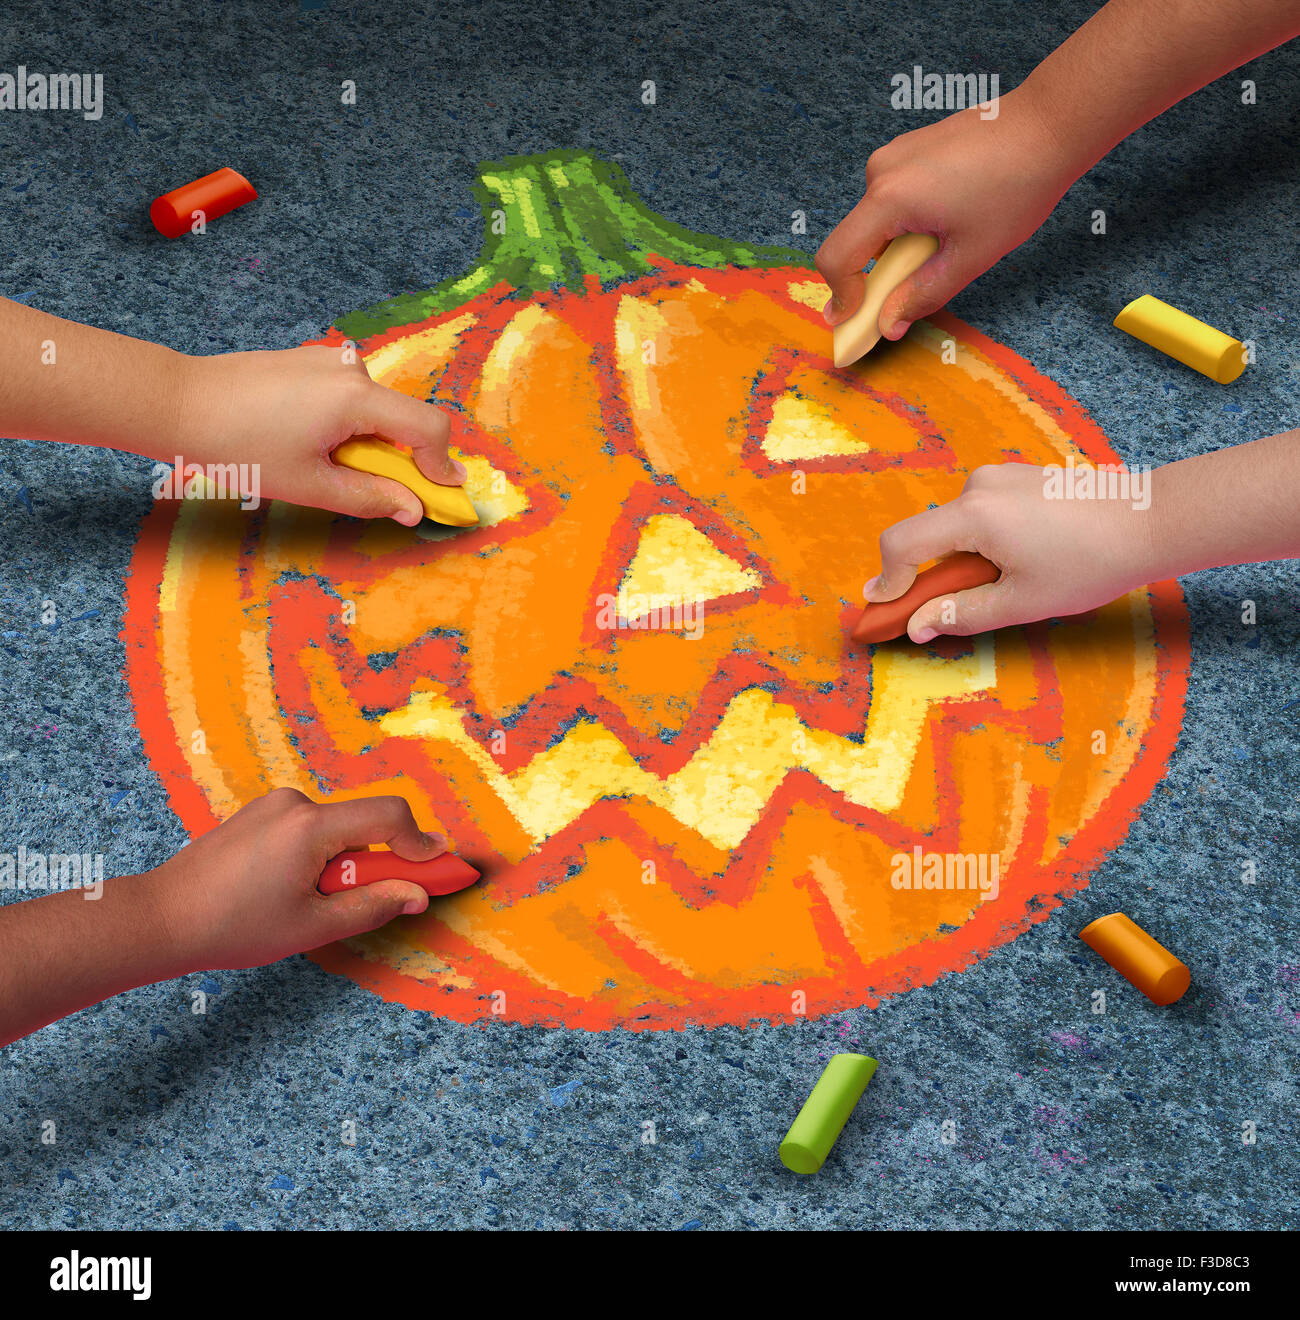 Halloween children drawing a jack o lantern pumpkin with chalk on the outdoor pavement as festive autumn season symbol for community participation in fun activities. Stock Photo